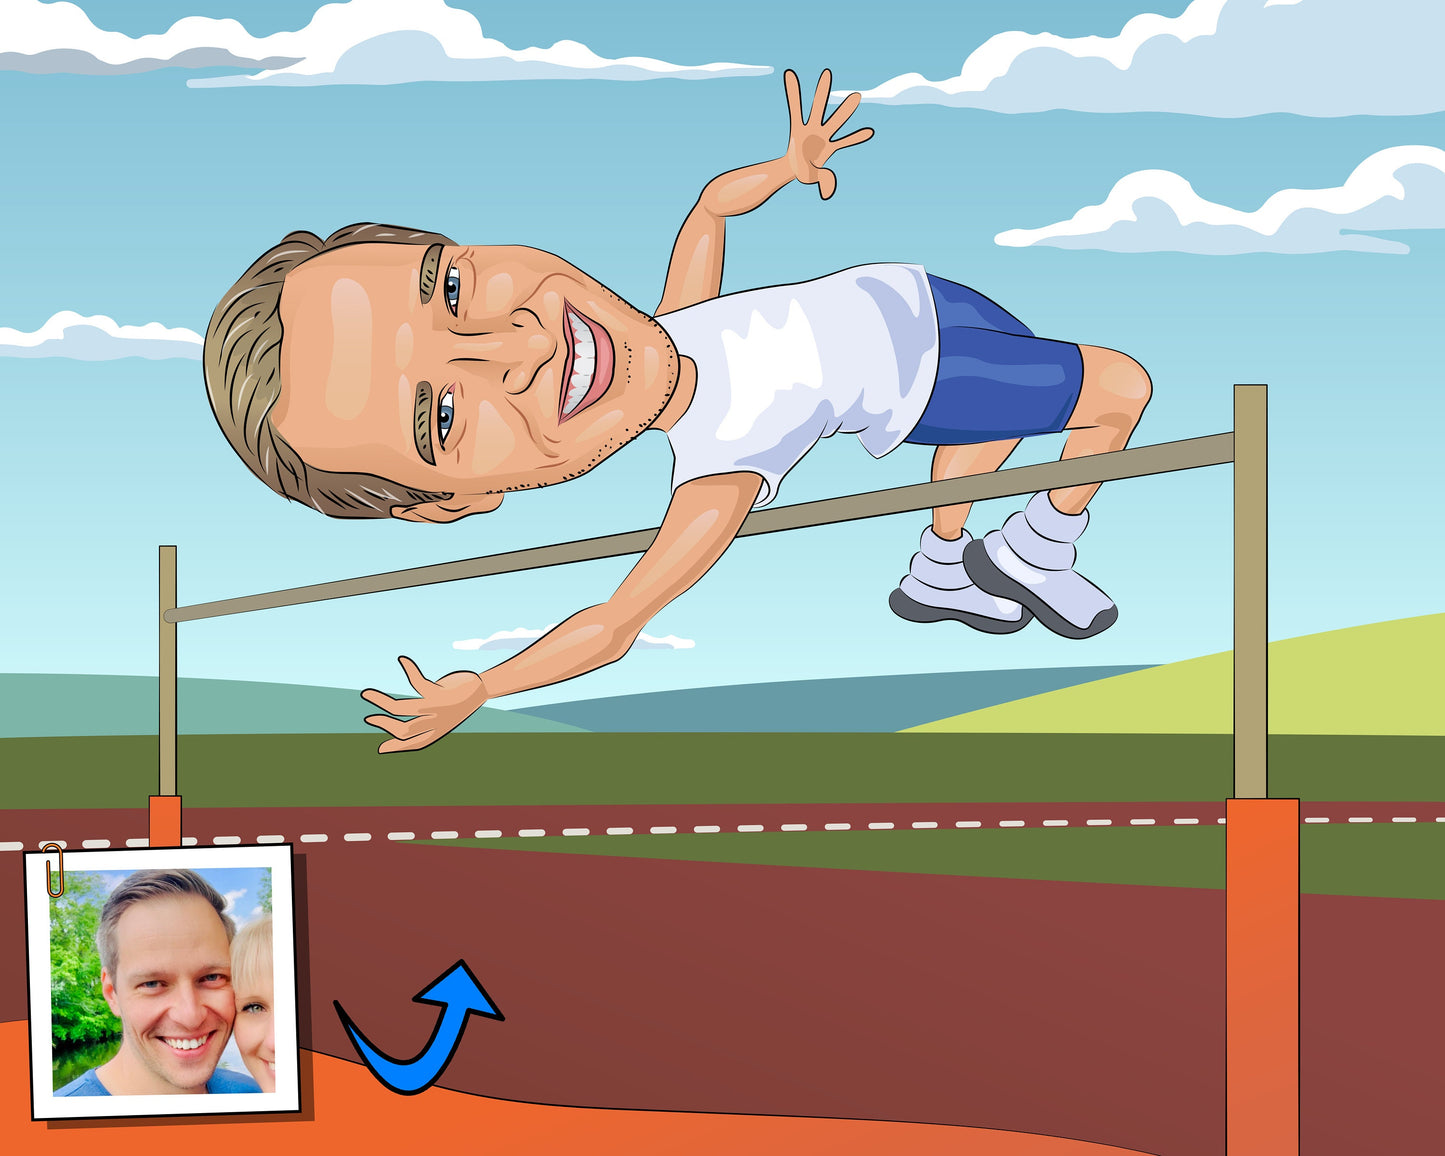 High Jumper Gift - Custom Caricature Portrait From Your Photo/track and field art